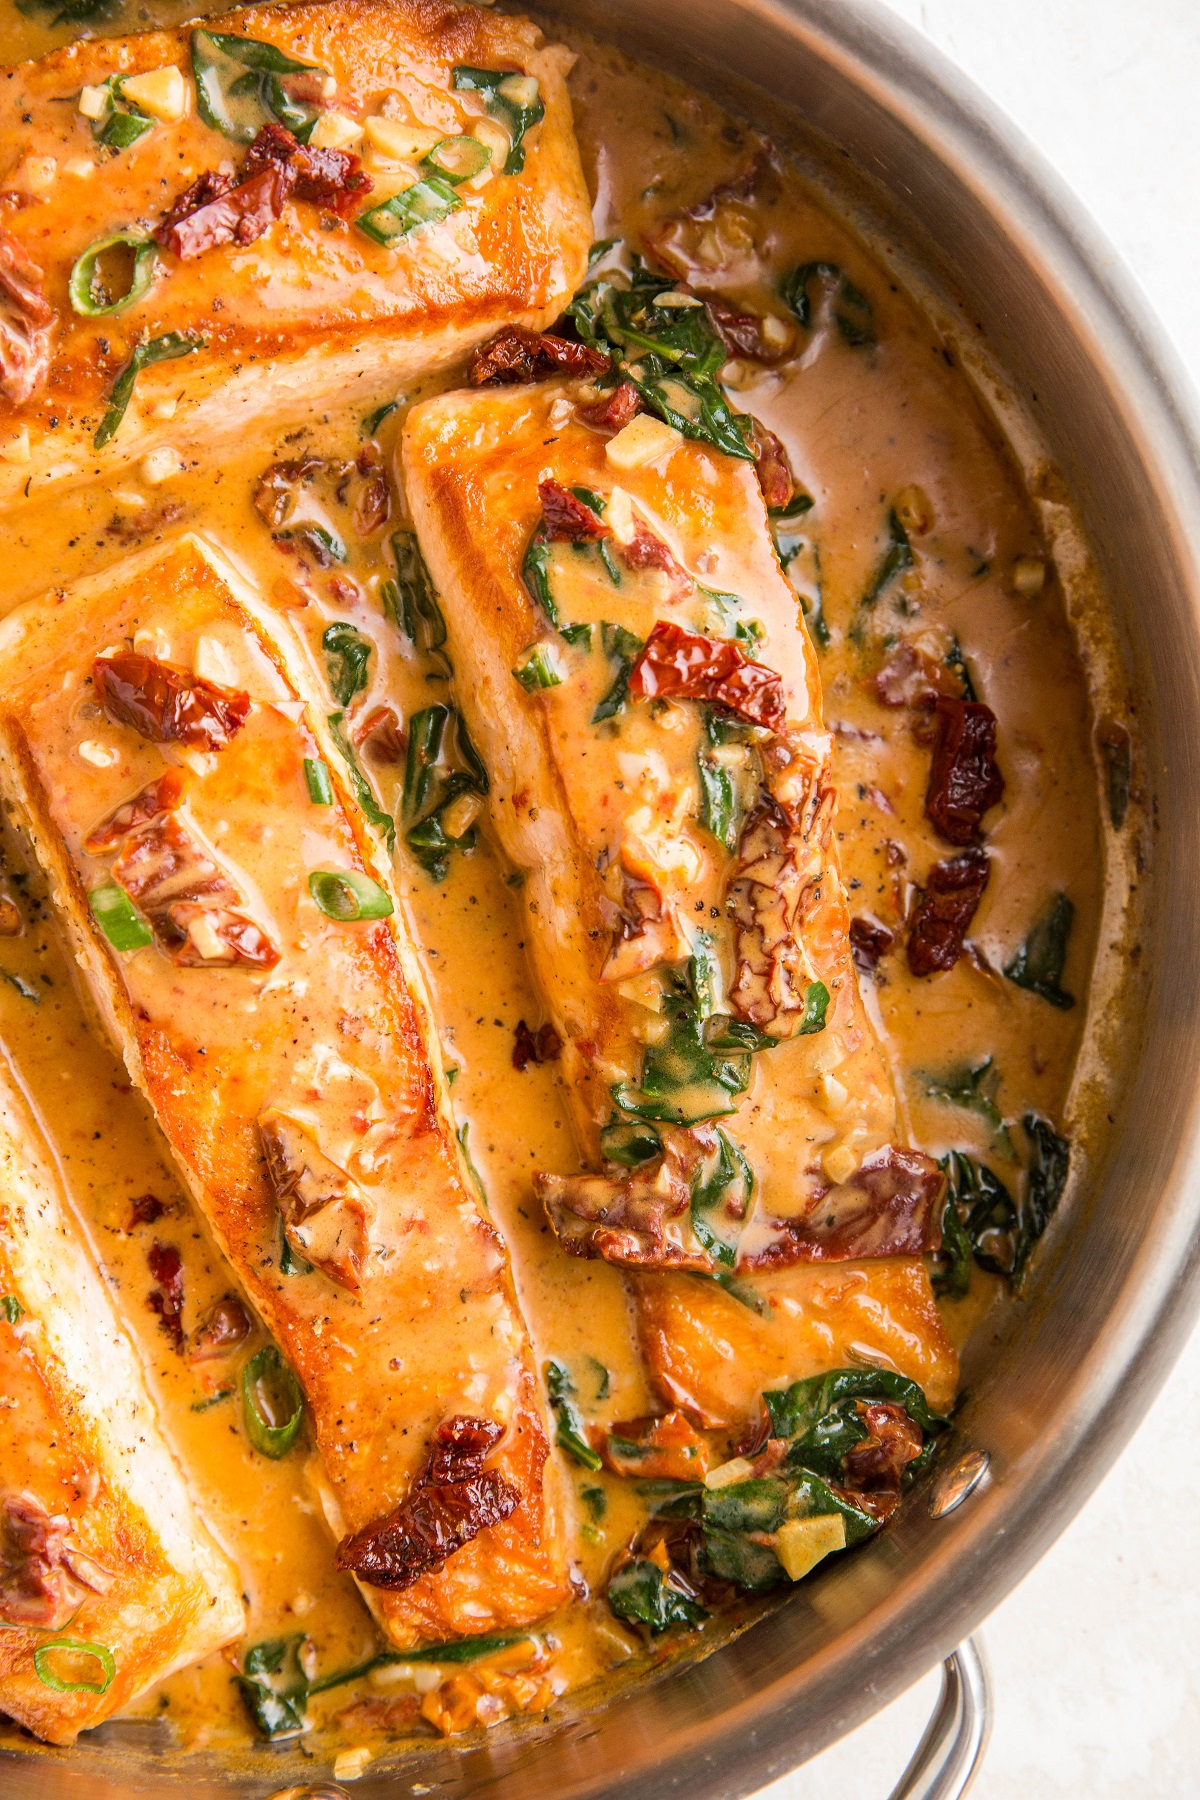 Creamy sun-dried tomato salmon in a skillet, ready to be served